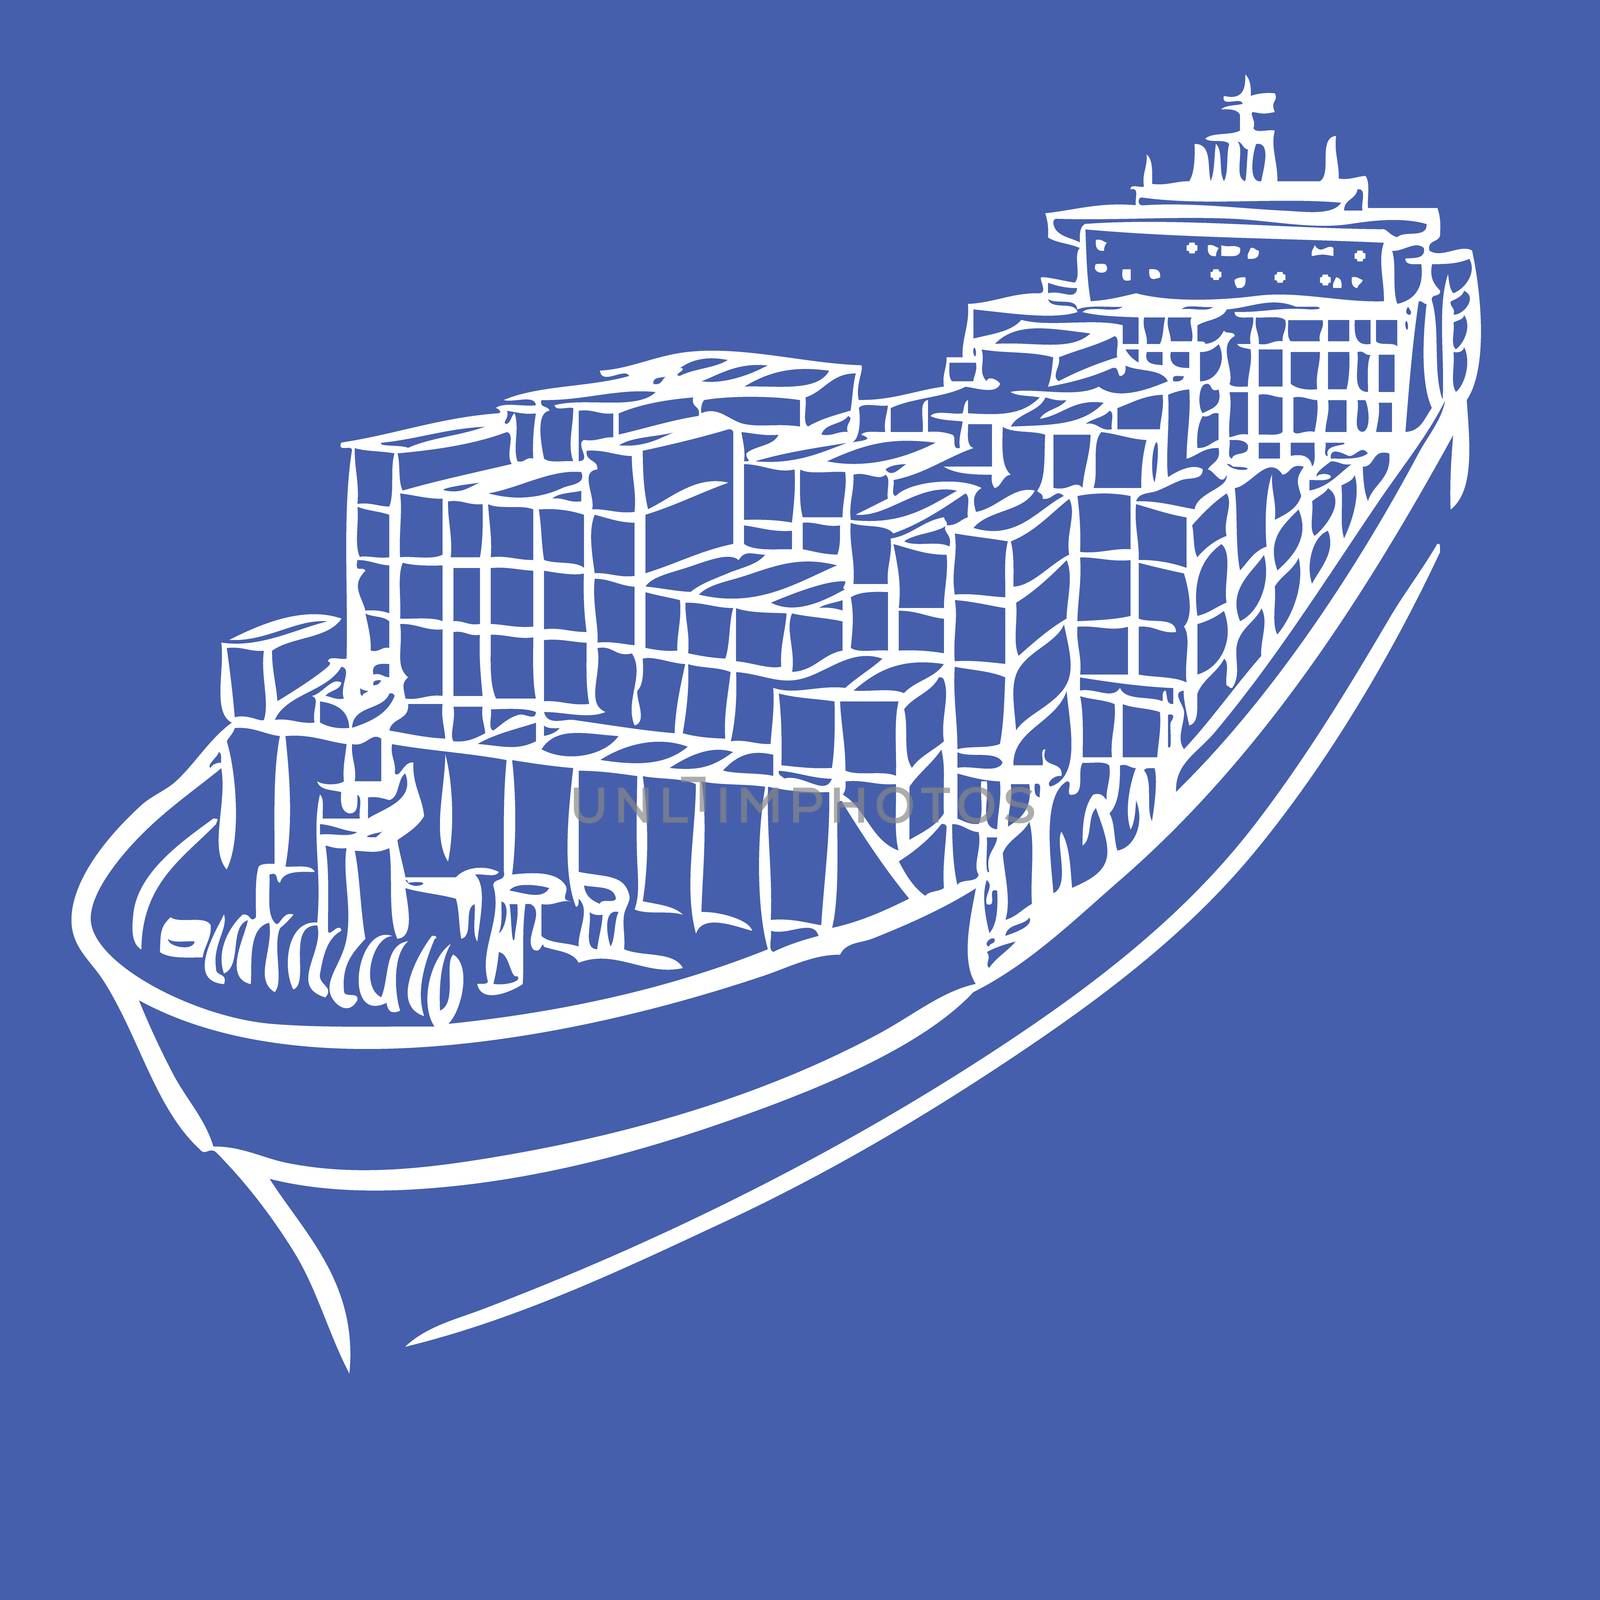 Cargo ship with containers icon hand drawn by simpleBE